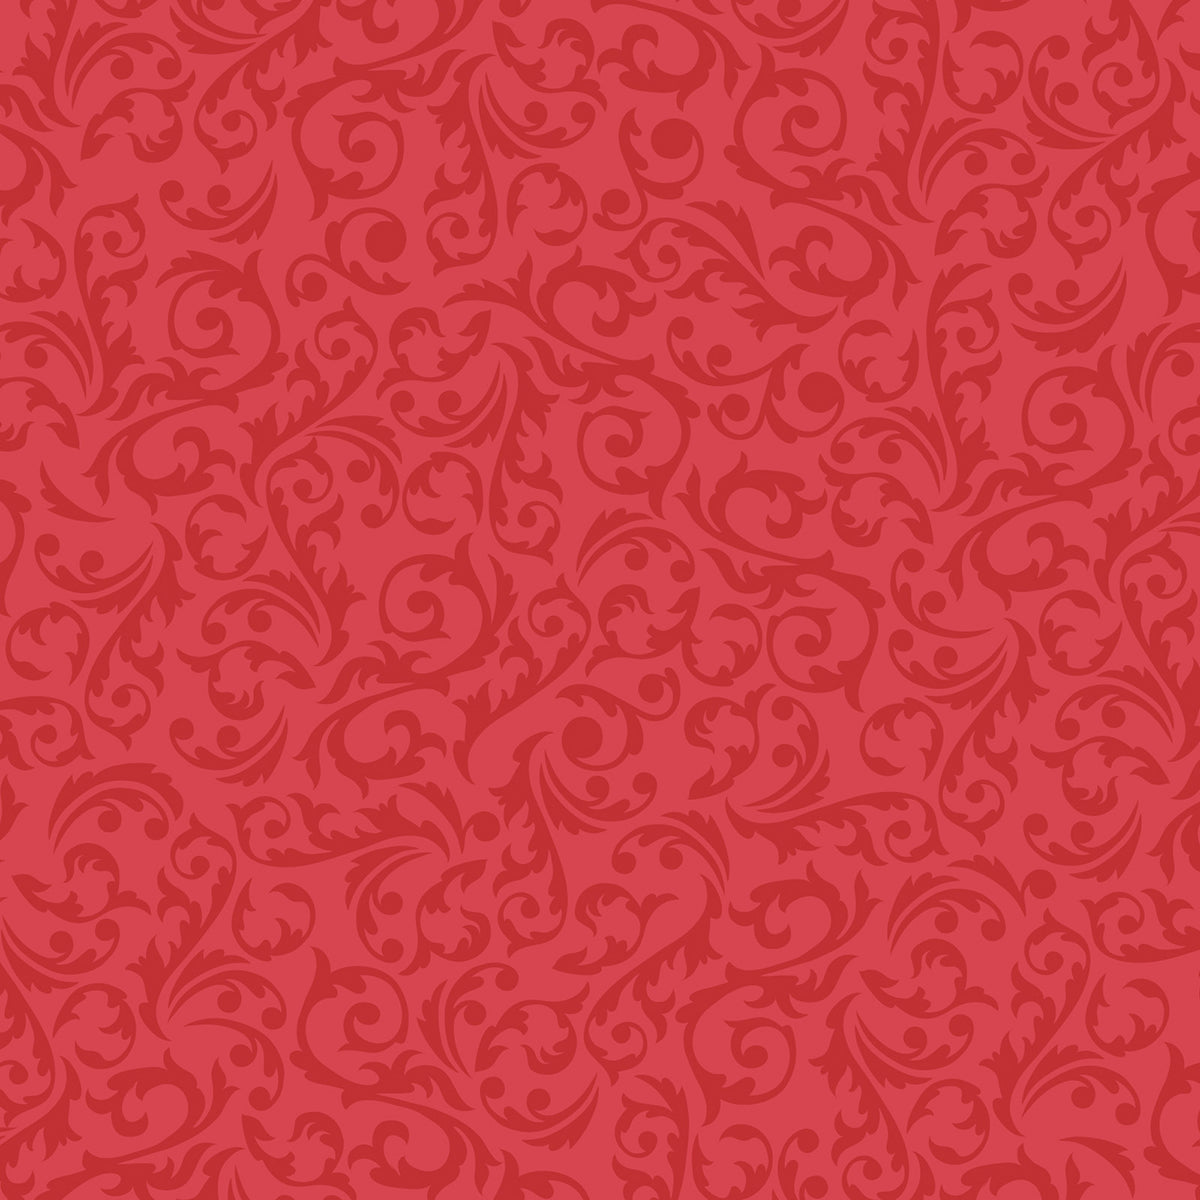 Core'dinations Core Basics Patterned Cardstock 12x12 Red Damask